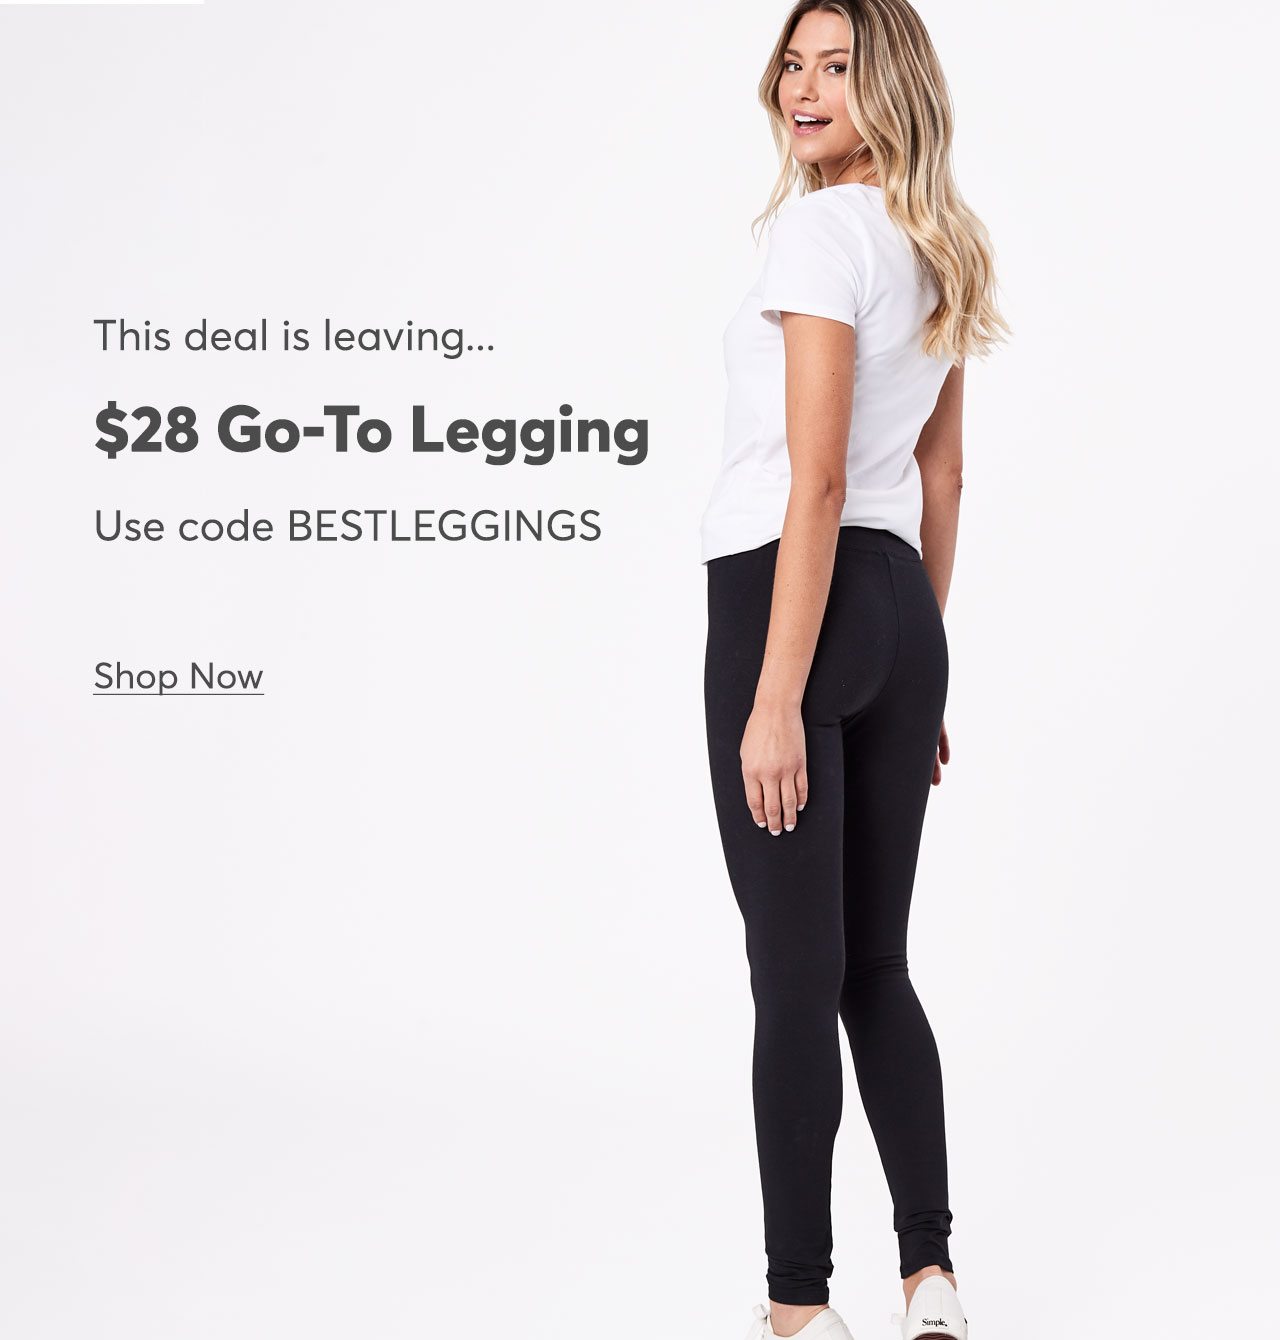 ENDS TONIGHT! Email Exclusive Offer: $28 Go-To Leggings with code BESTLEGGINGS